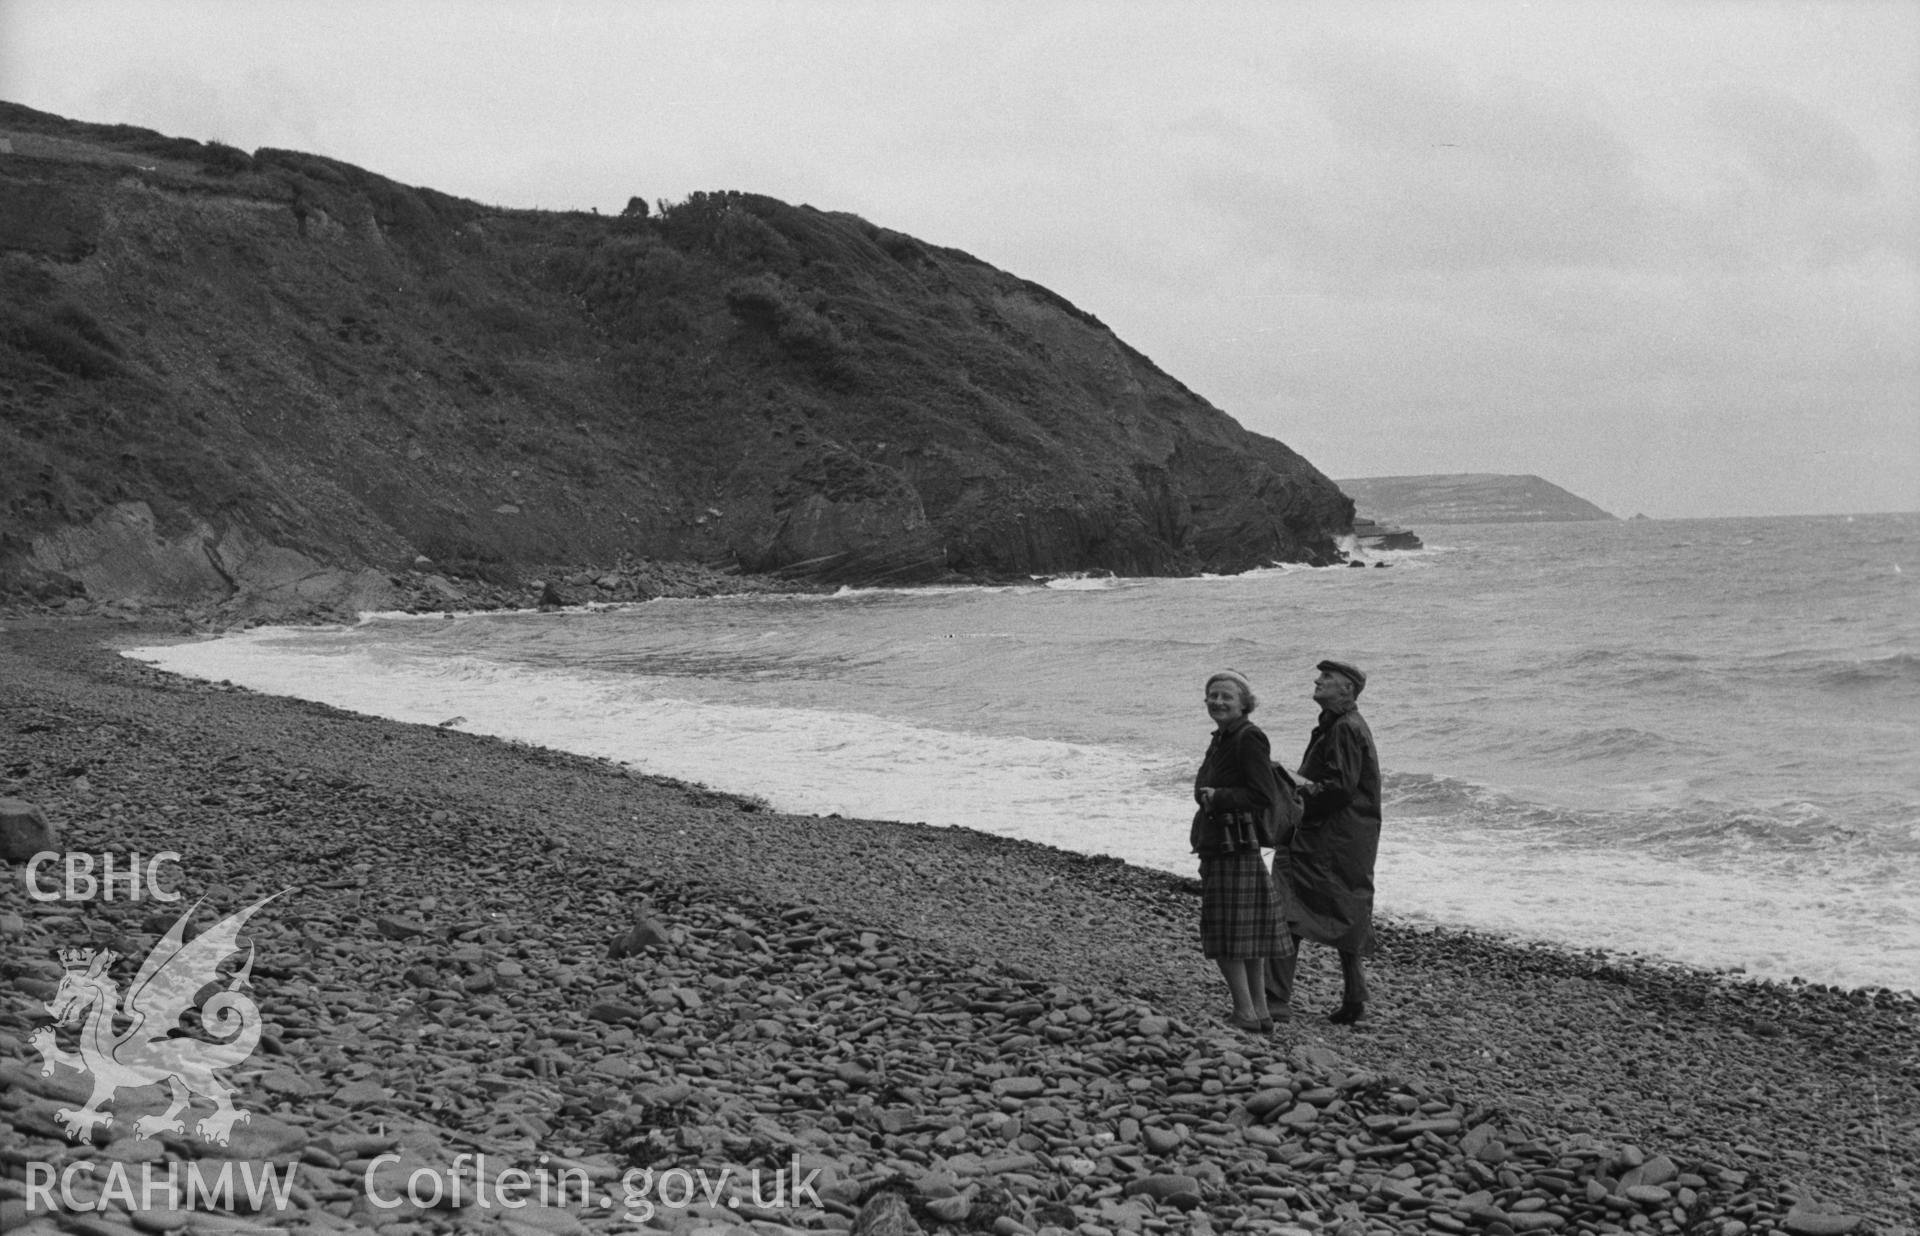 Black and White photograph showing figures at Gilfach yr Halen beach, 200m north east of the mouth of Afon Cwinten, New Quay Head in distance. Photographed by Arthur Chater in August 1962 from Grid Reference SN 437 615 looking south west.